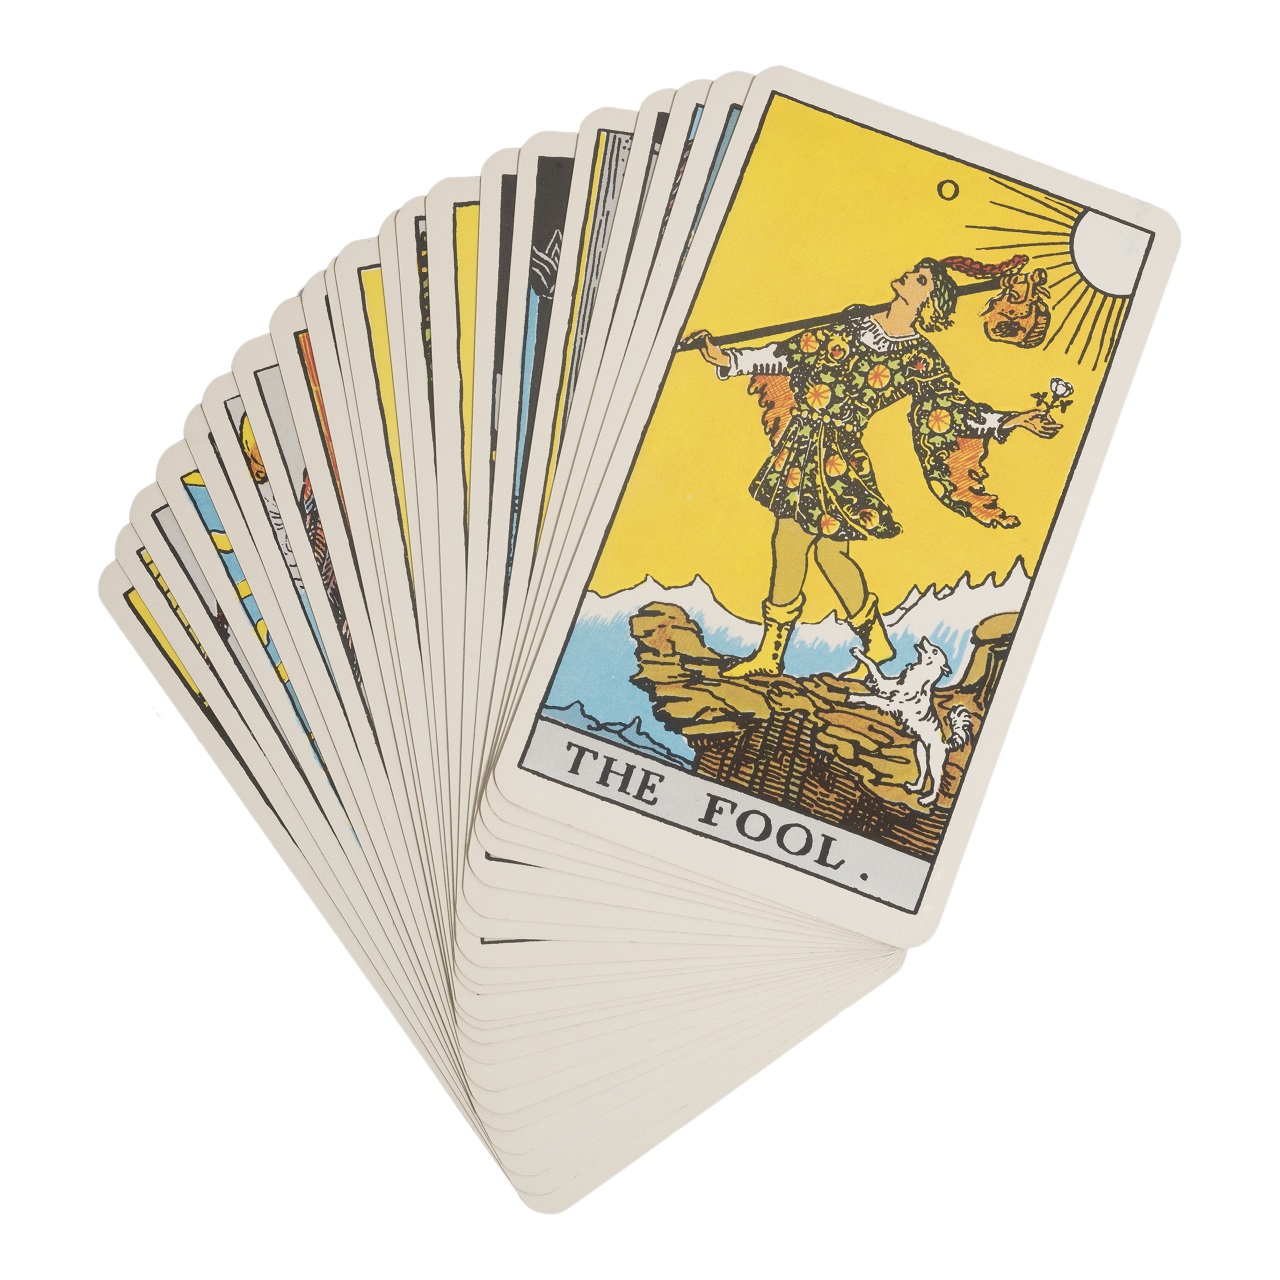 Rider-Waite Tarot cards deck with the first card, The Fool (0) showing